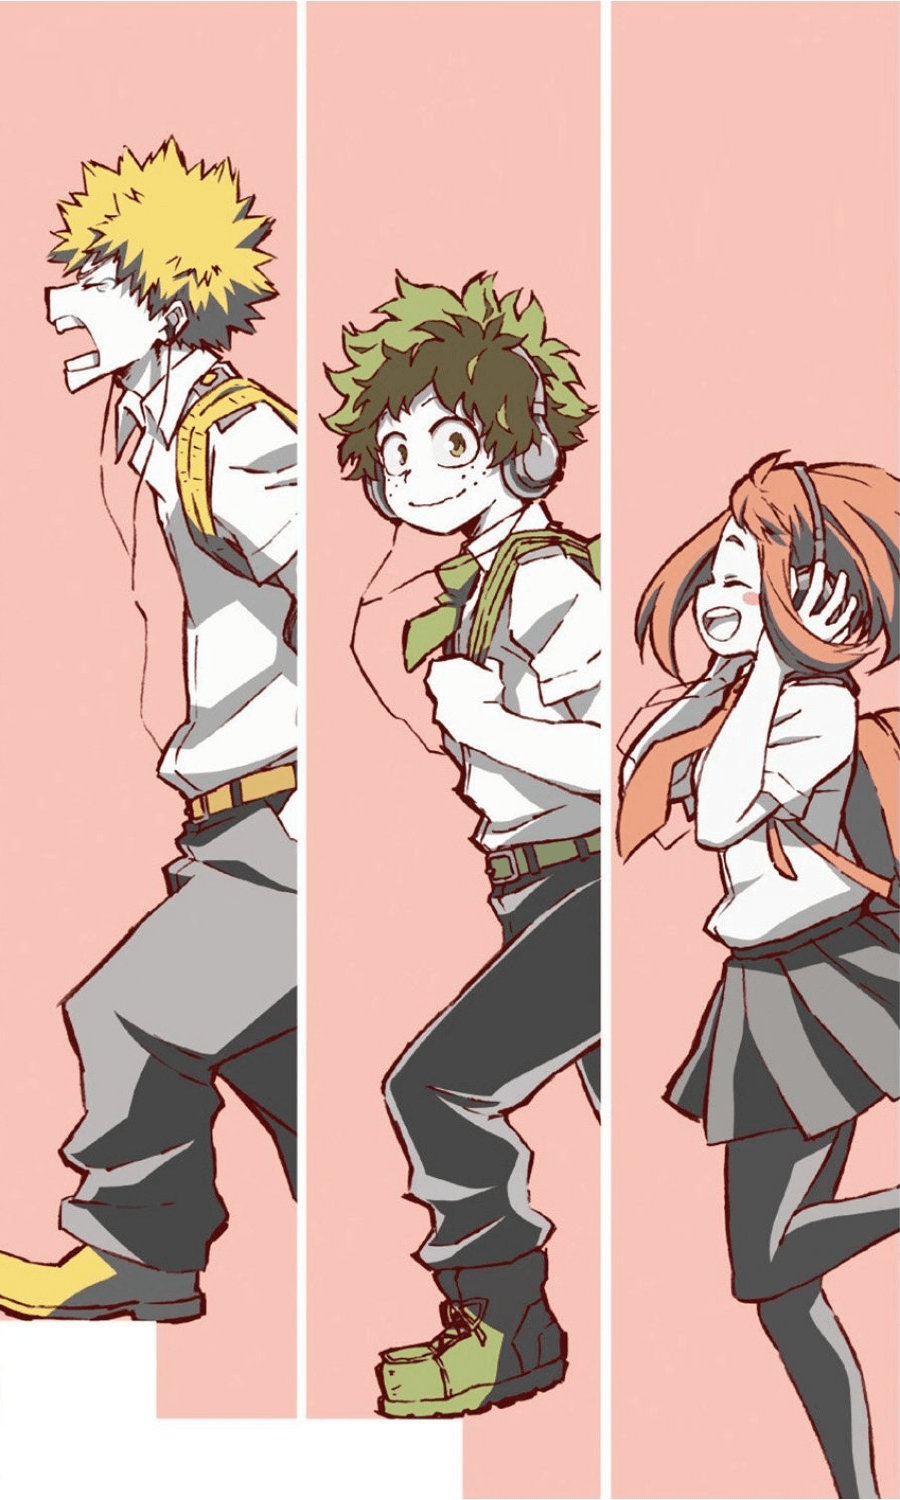 I really liked the new soundtrack album's artwork, so I made a little phone wallpaper of the three main characters from it!